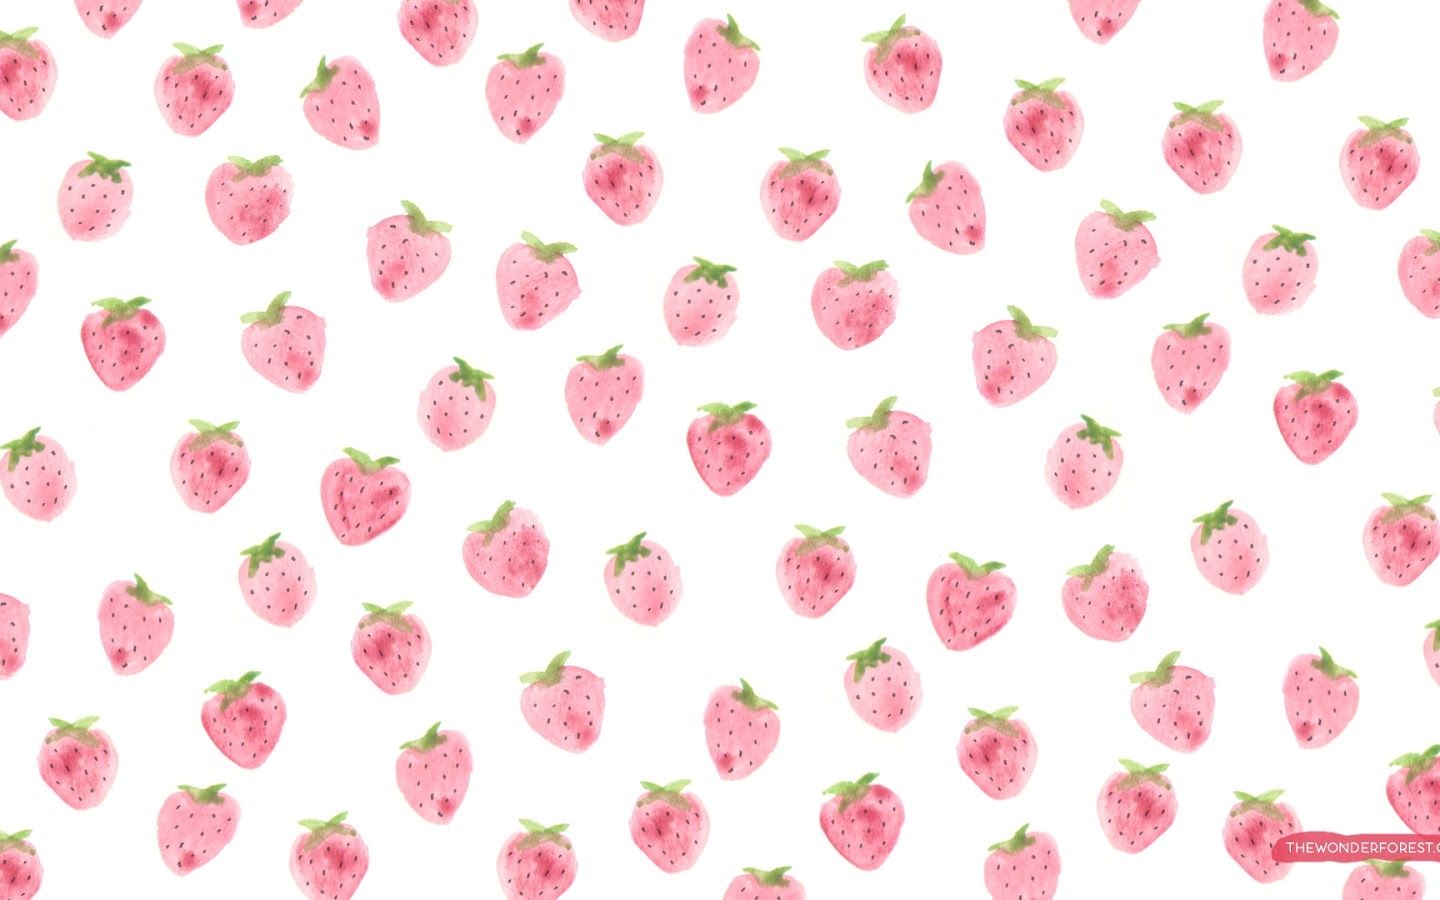 Free download Cute Strawberry Wallpaper All HD Wallpaper [1600x900] for your Desktop, Mobile & Tablet. Explore Kawaii Strawberry Wallpaper. Strawberry Shortcake Wallpaper, Vintage Strawberry Shortcake Wallpaper, Vintage Strawberry Wallpaper